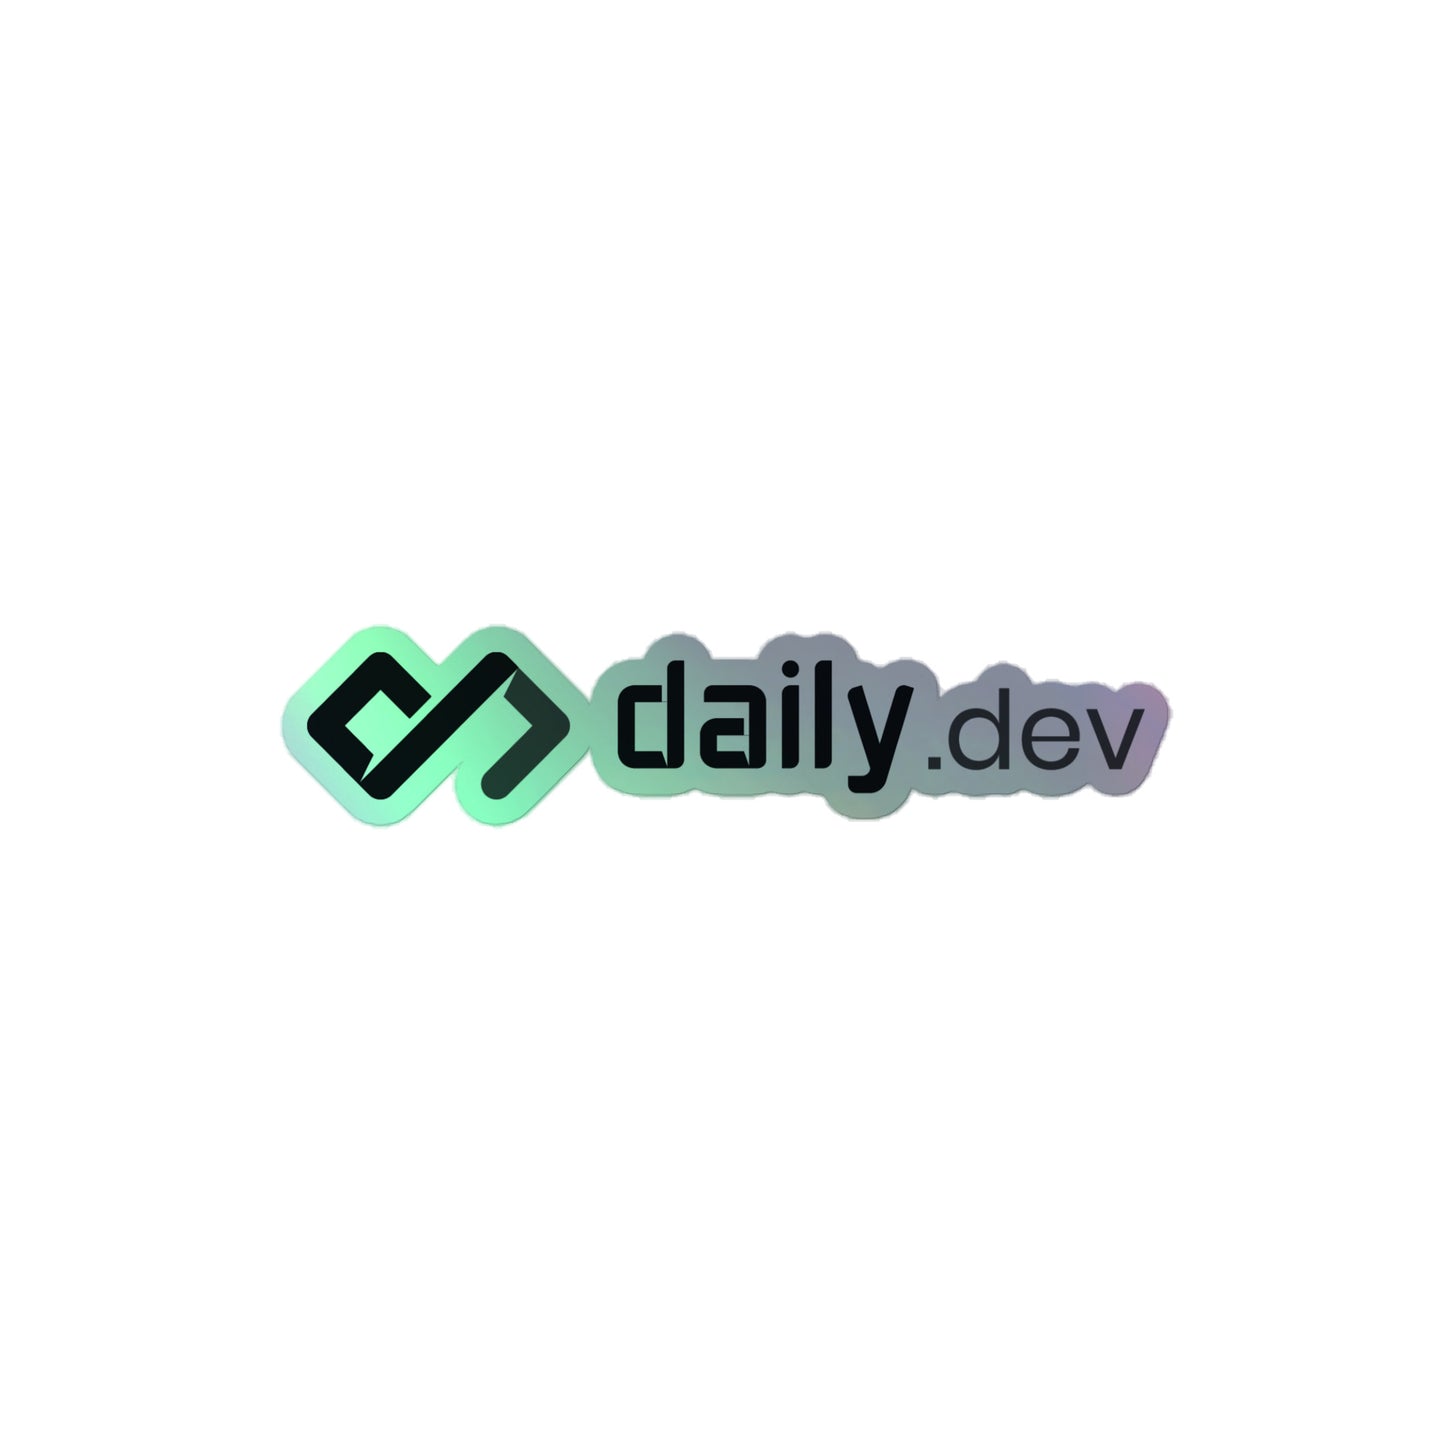 daily.dev holographic stickers